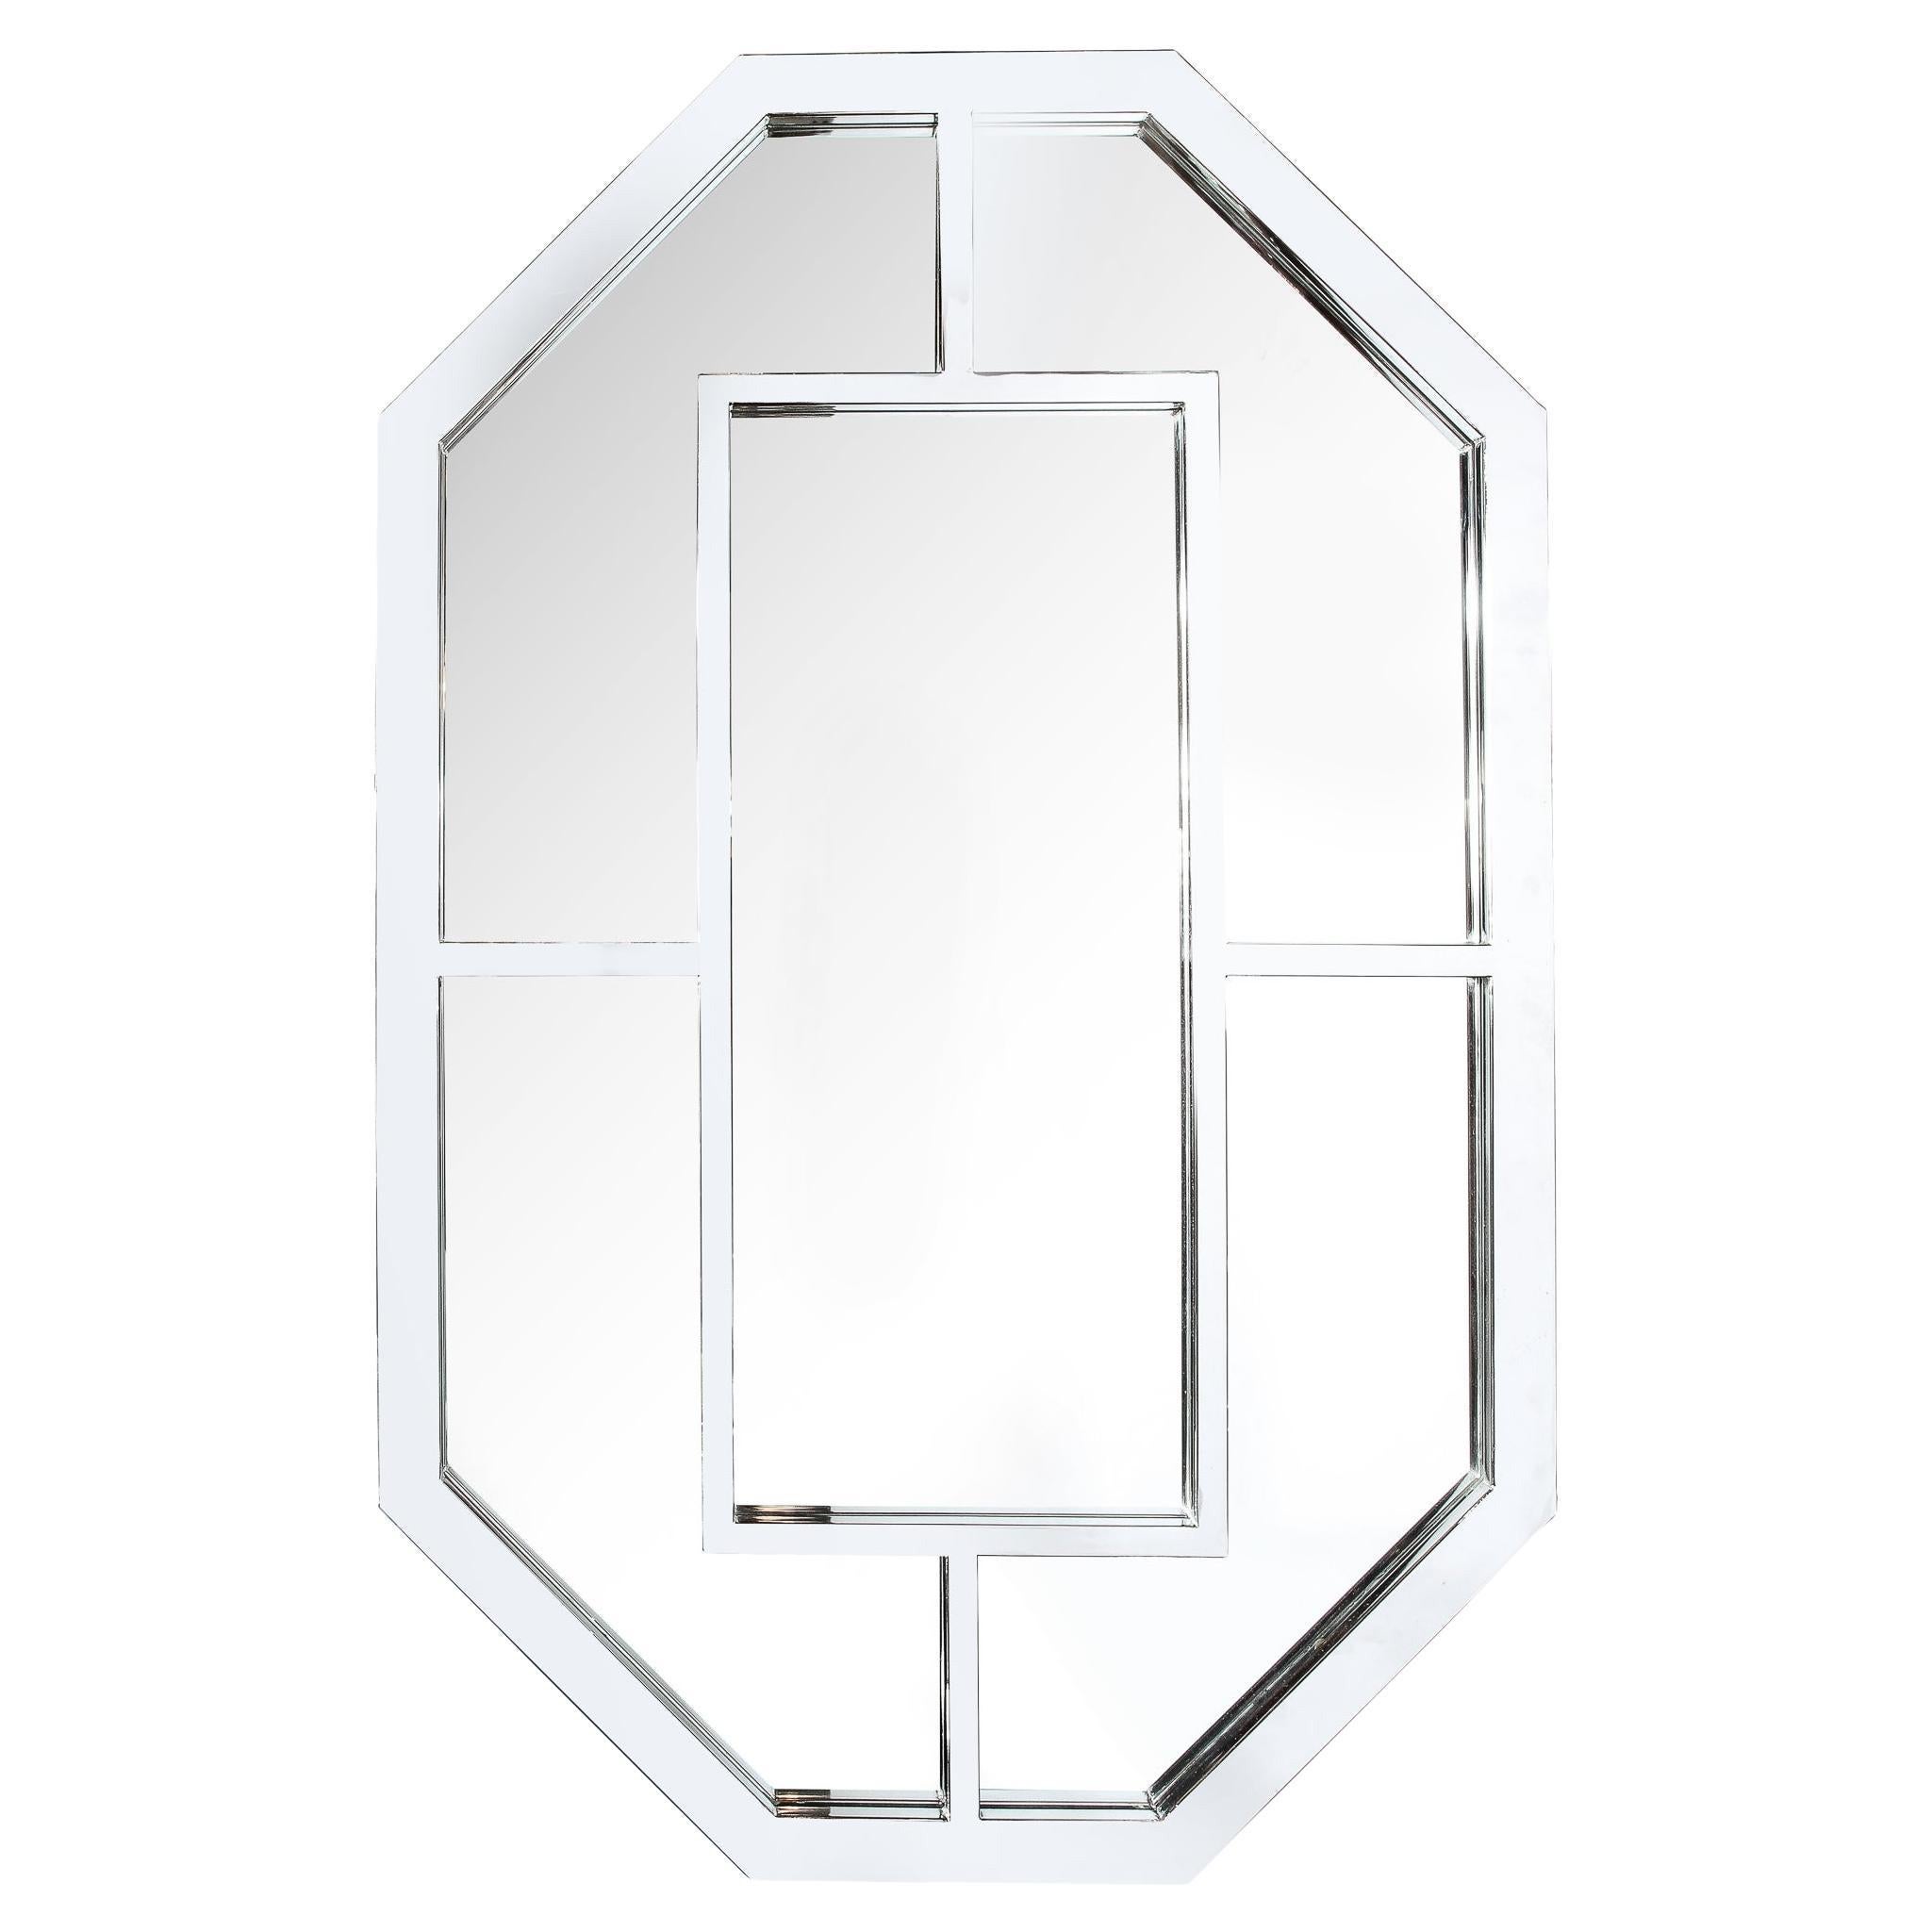 Modernist Geometric Shield Form Octagonal Geometric Mirror with Chrome Detailing For Sale